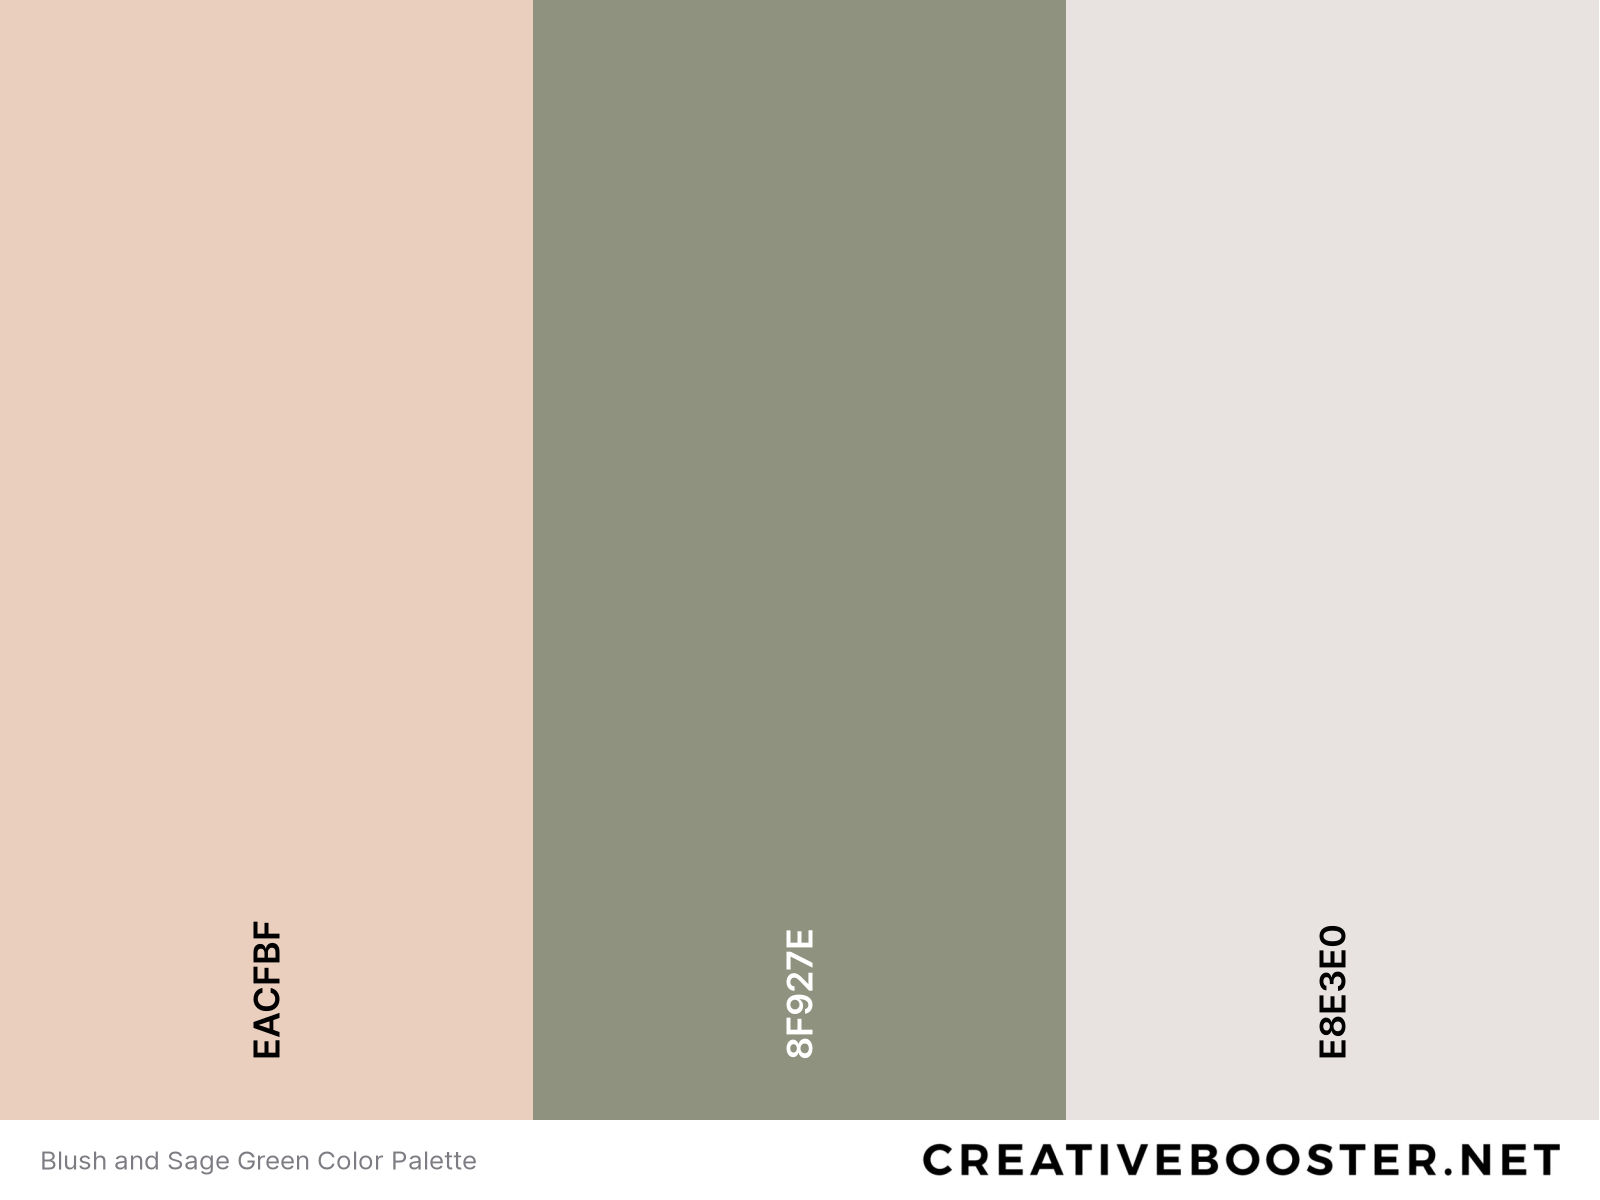 Blush and Sage Green Color Palette